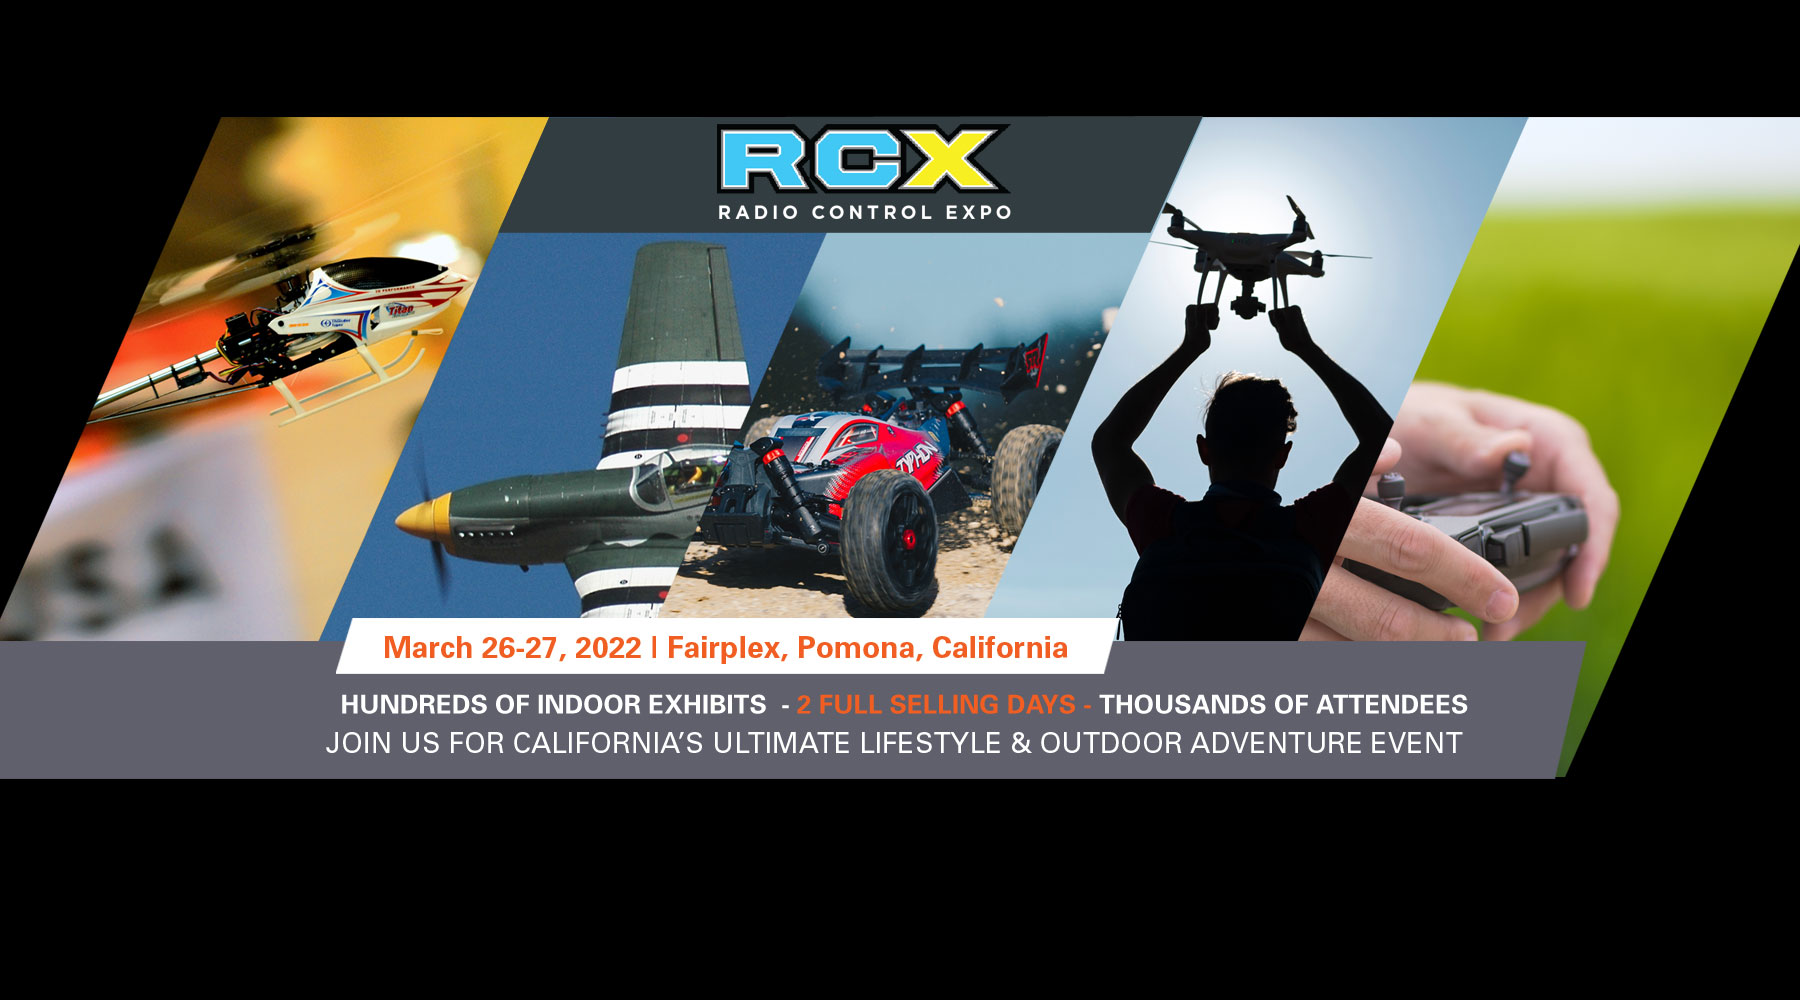 RCX is back! See the Full Press Release